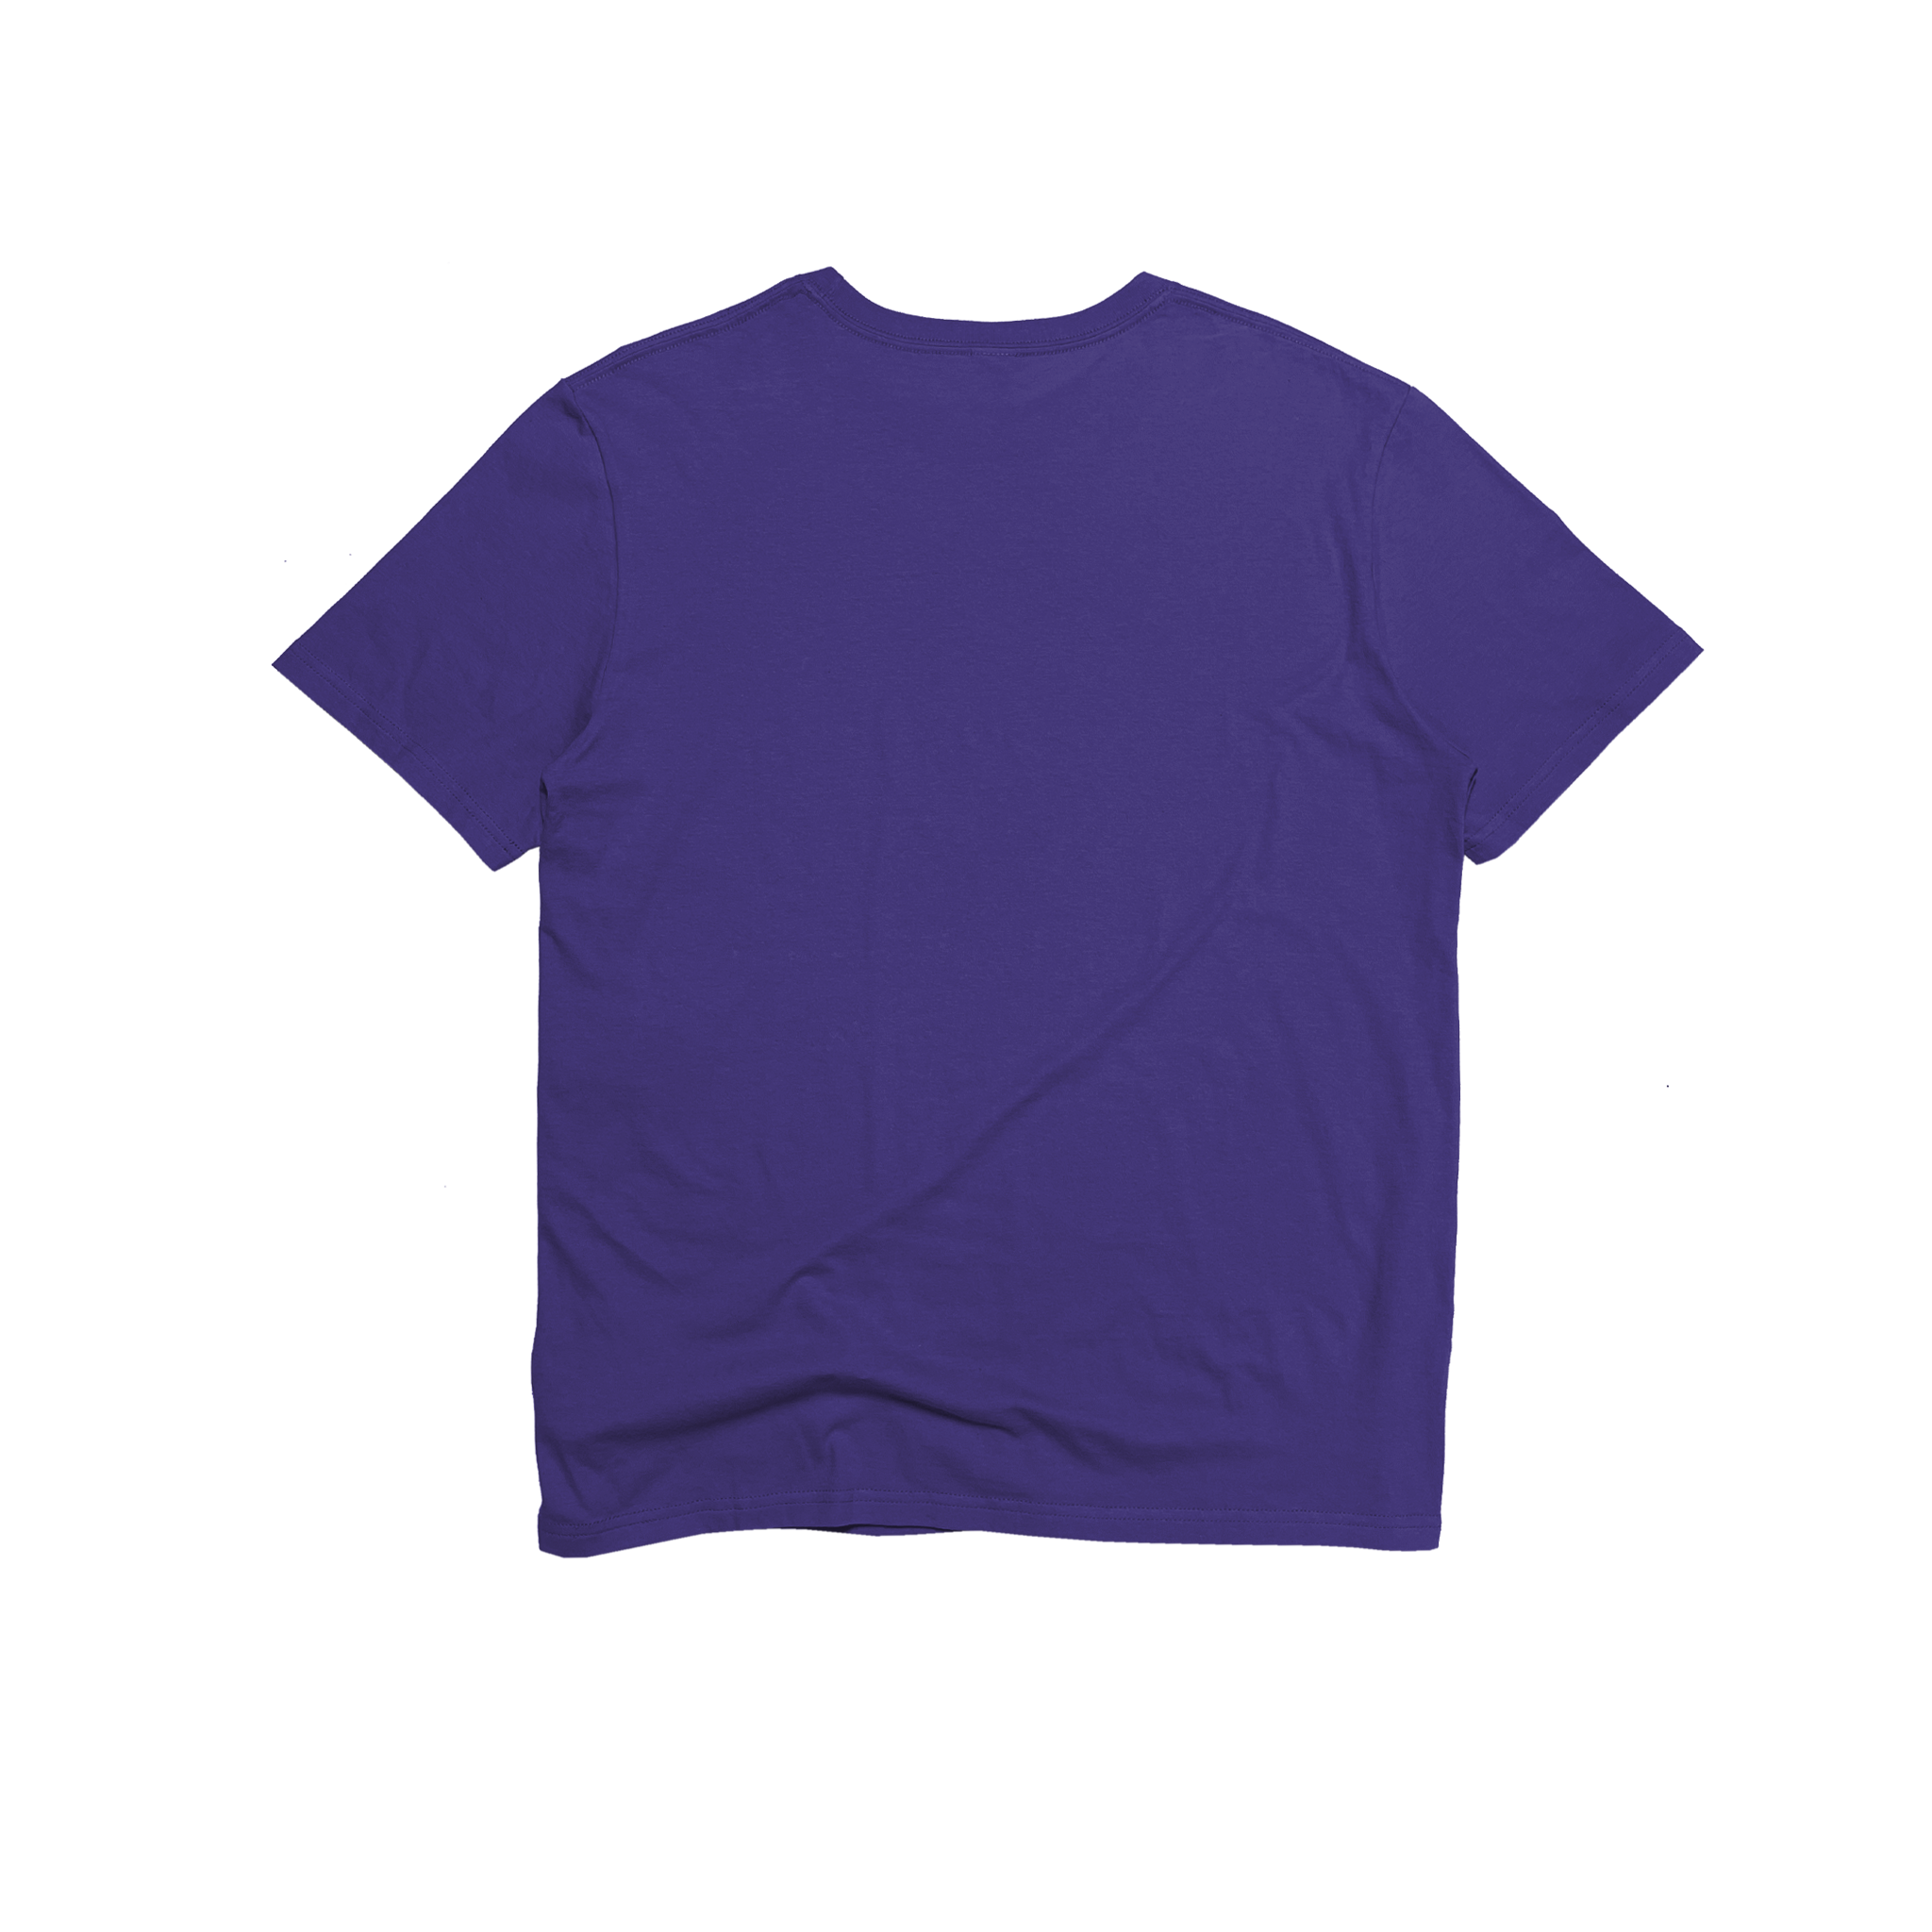 Back Flat Lay of GOEX Unisex and Men's Cotton Tee in Purple